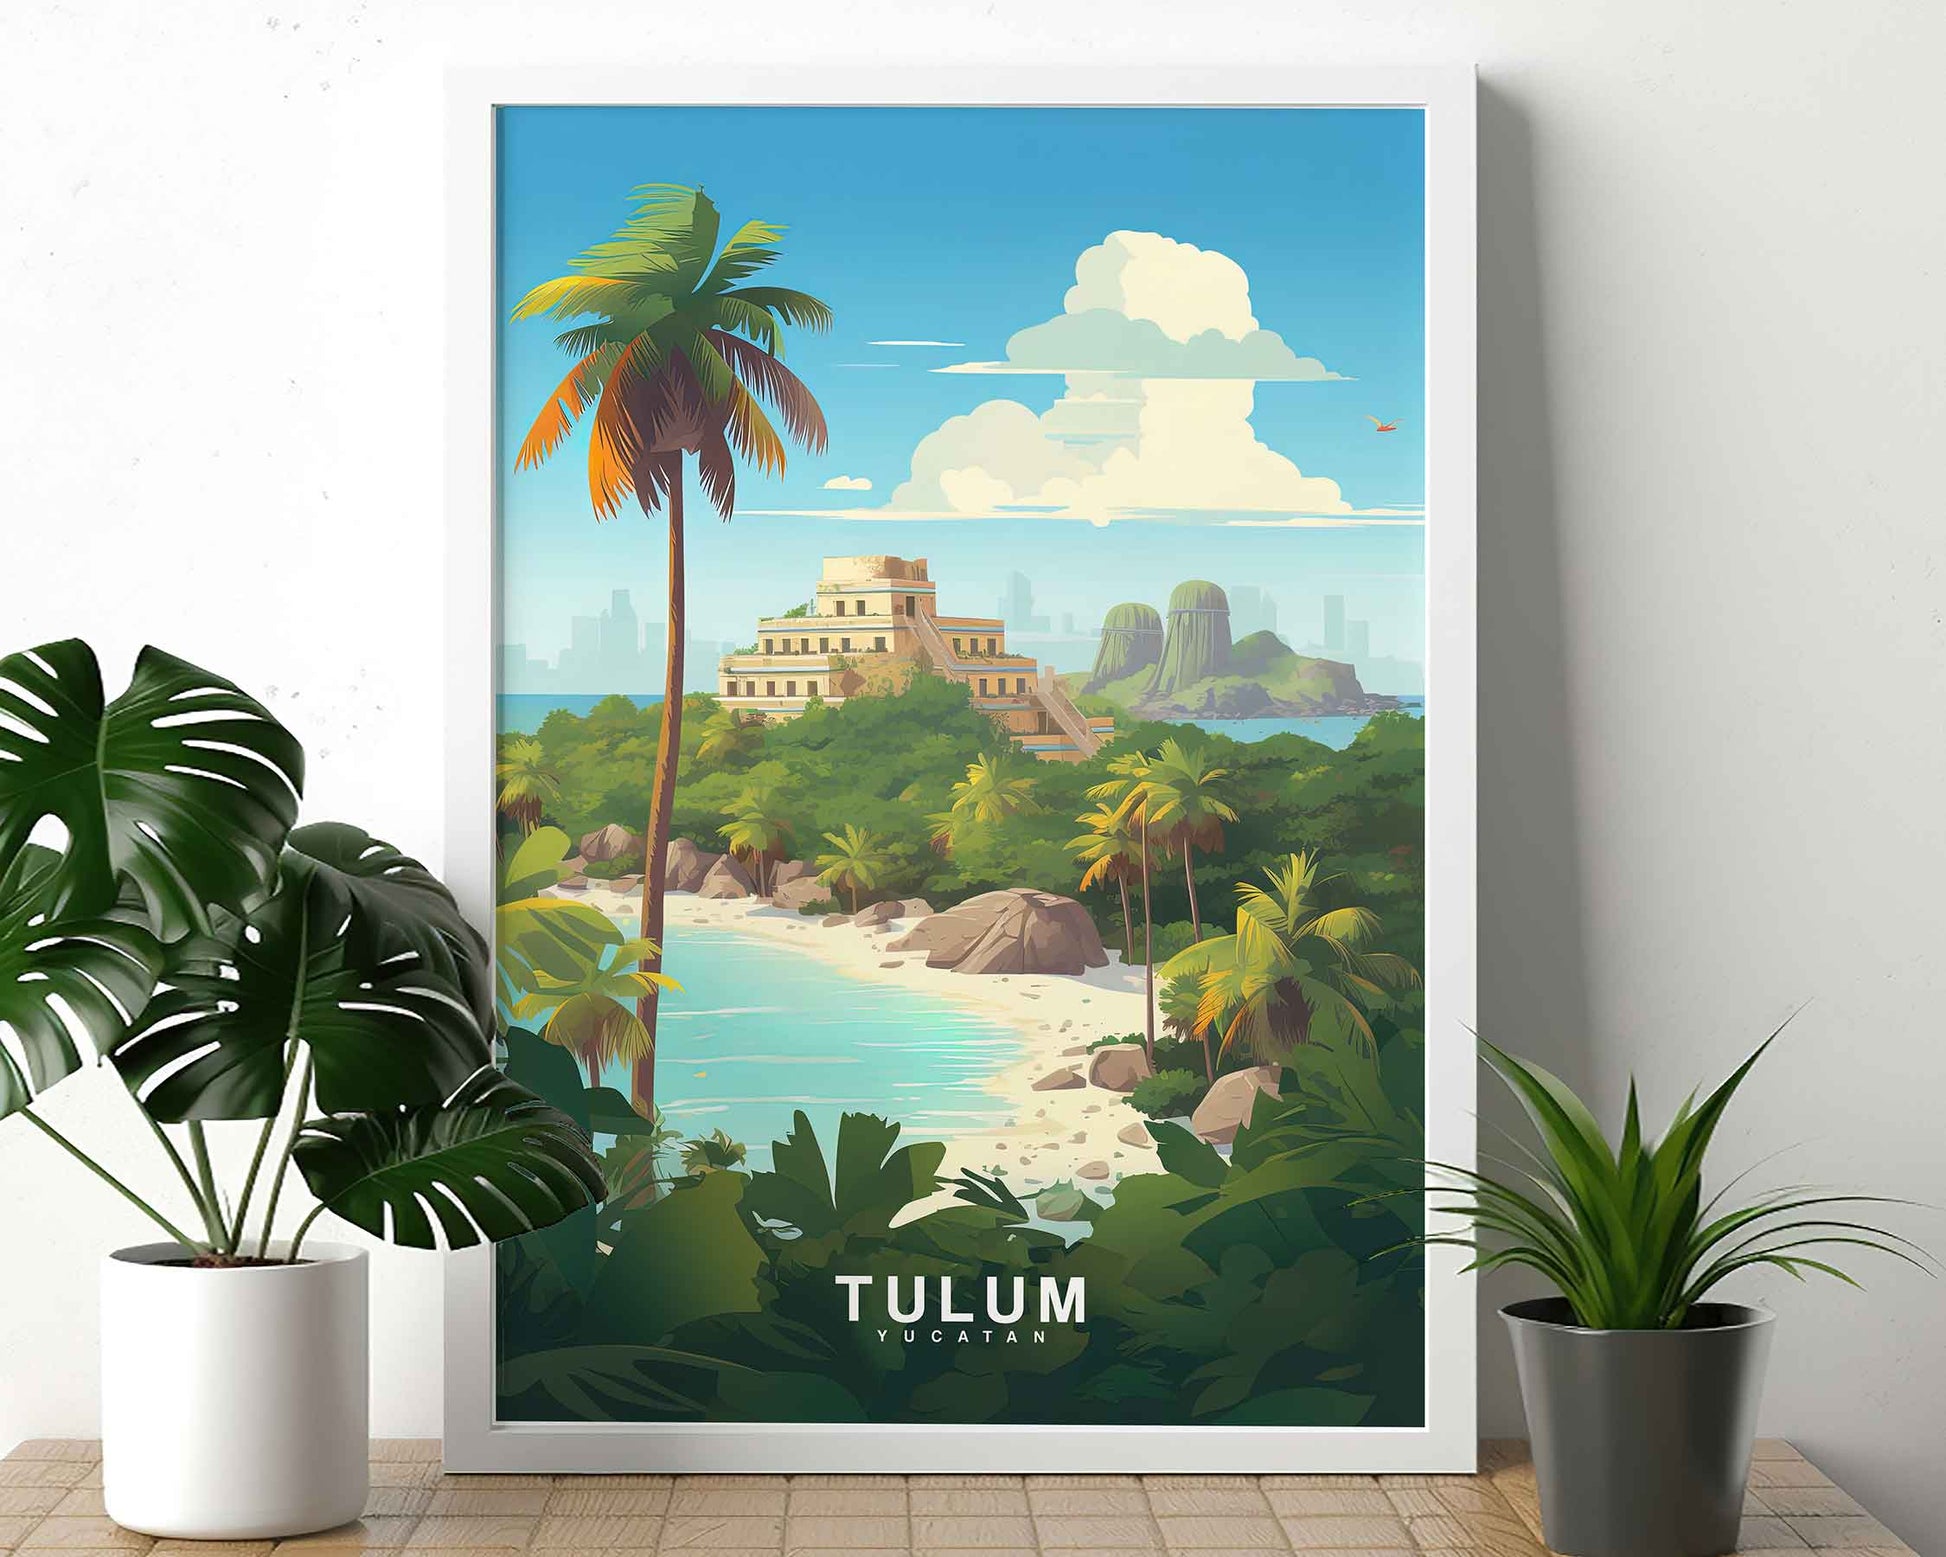 Framed Image of Tulum Travel Poster Tourism Wall Art Print, Mexico Illustration